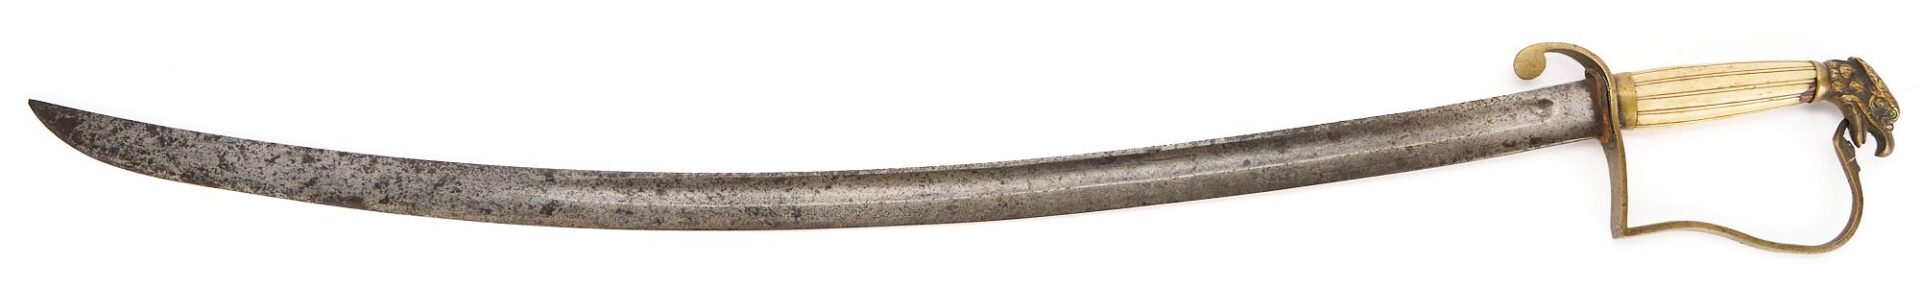 Lot 535: 2 Eagle Head Swords, incl. 1 with Metal Scabbard